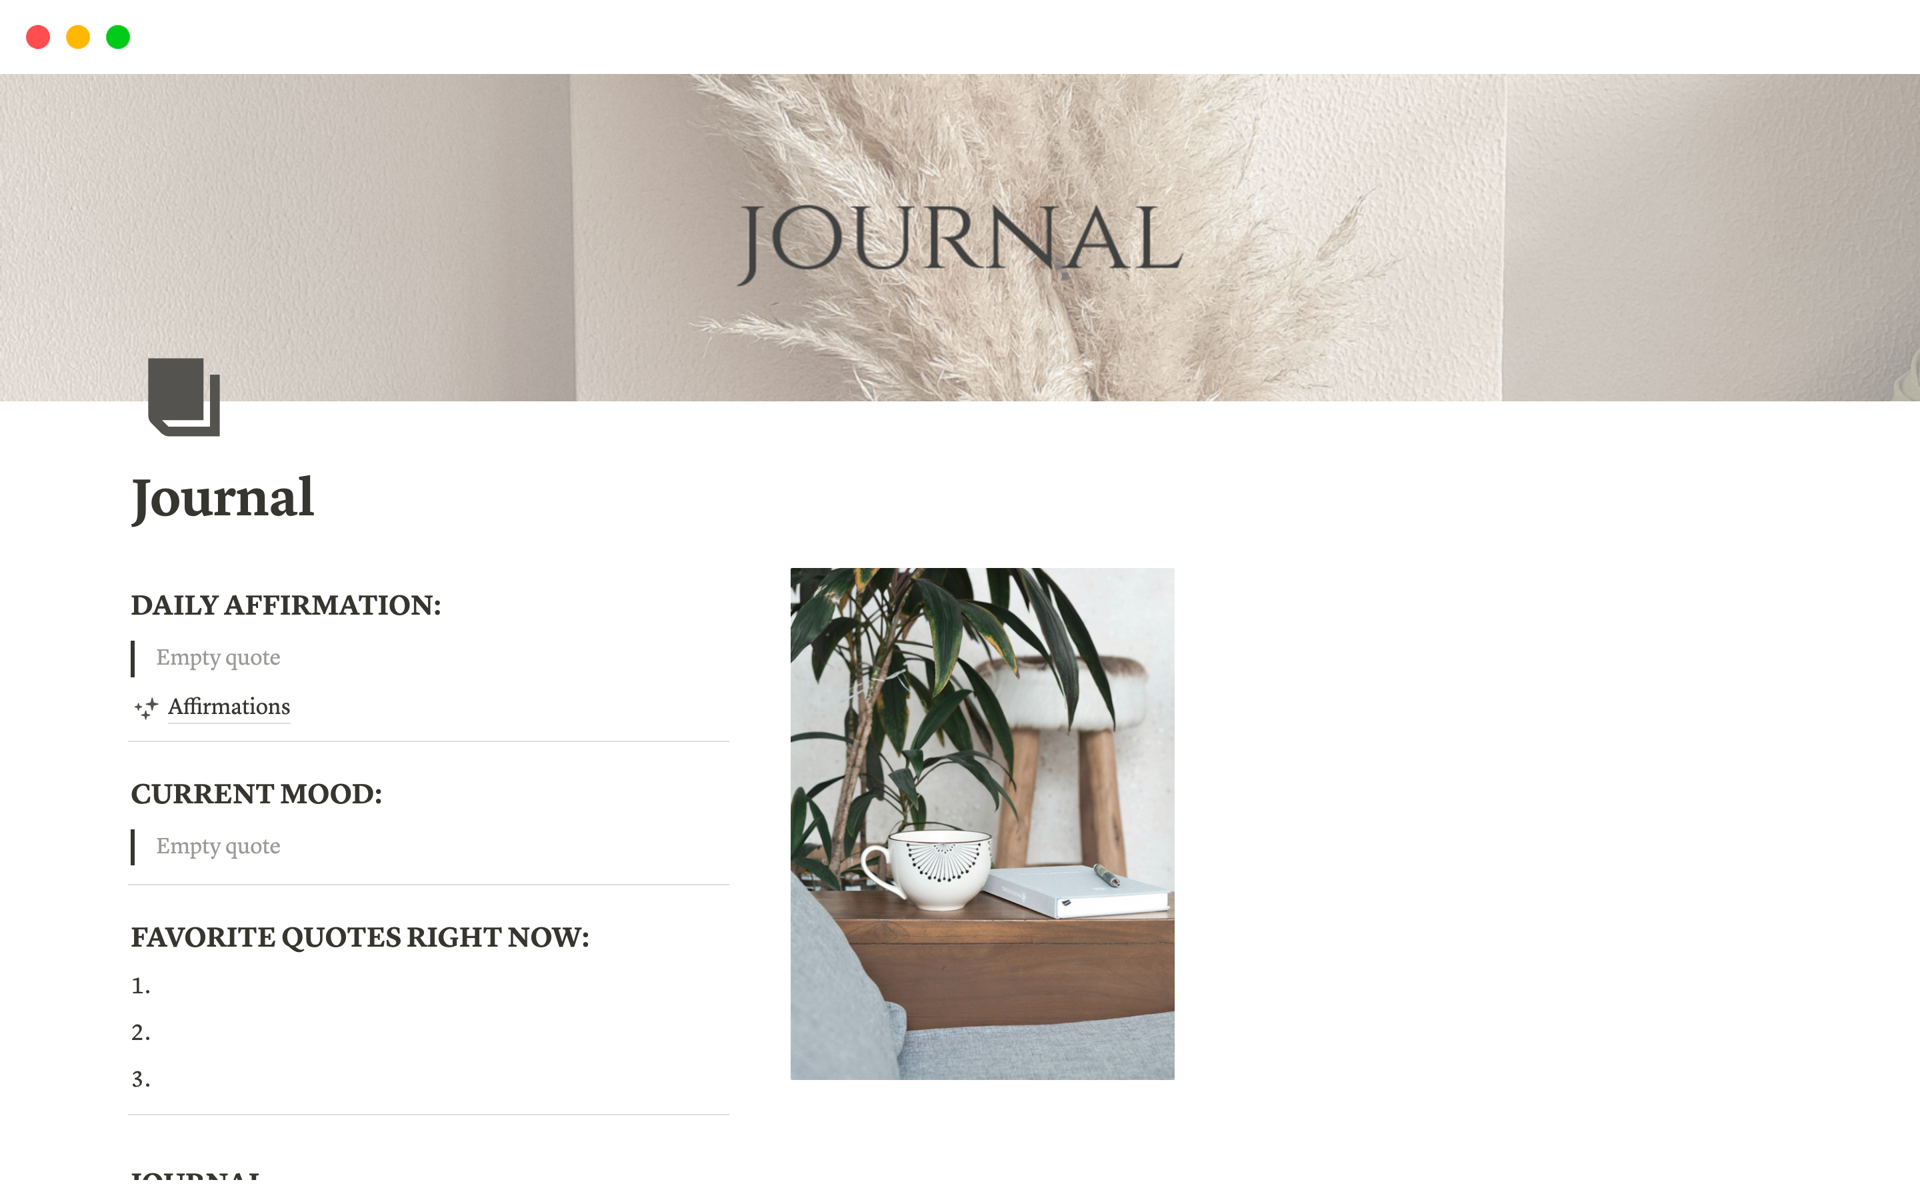 This journal template gives you many templates to duplicate any time you want to journal.